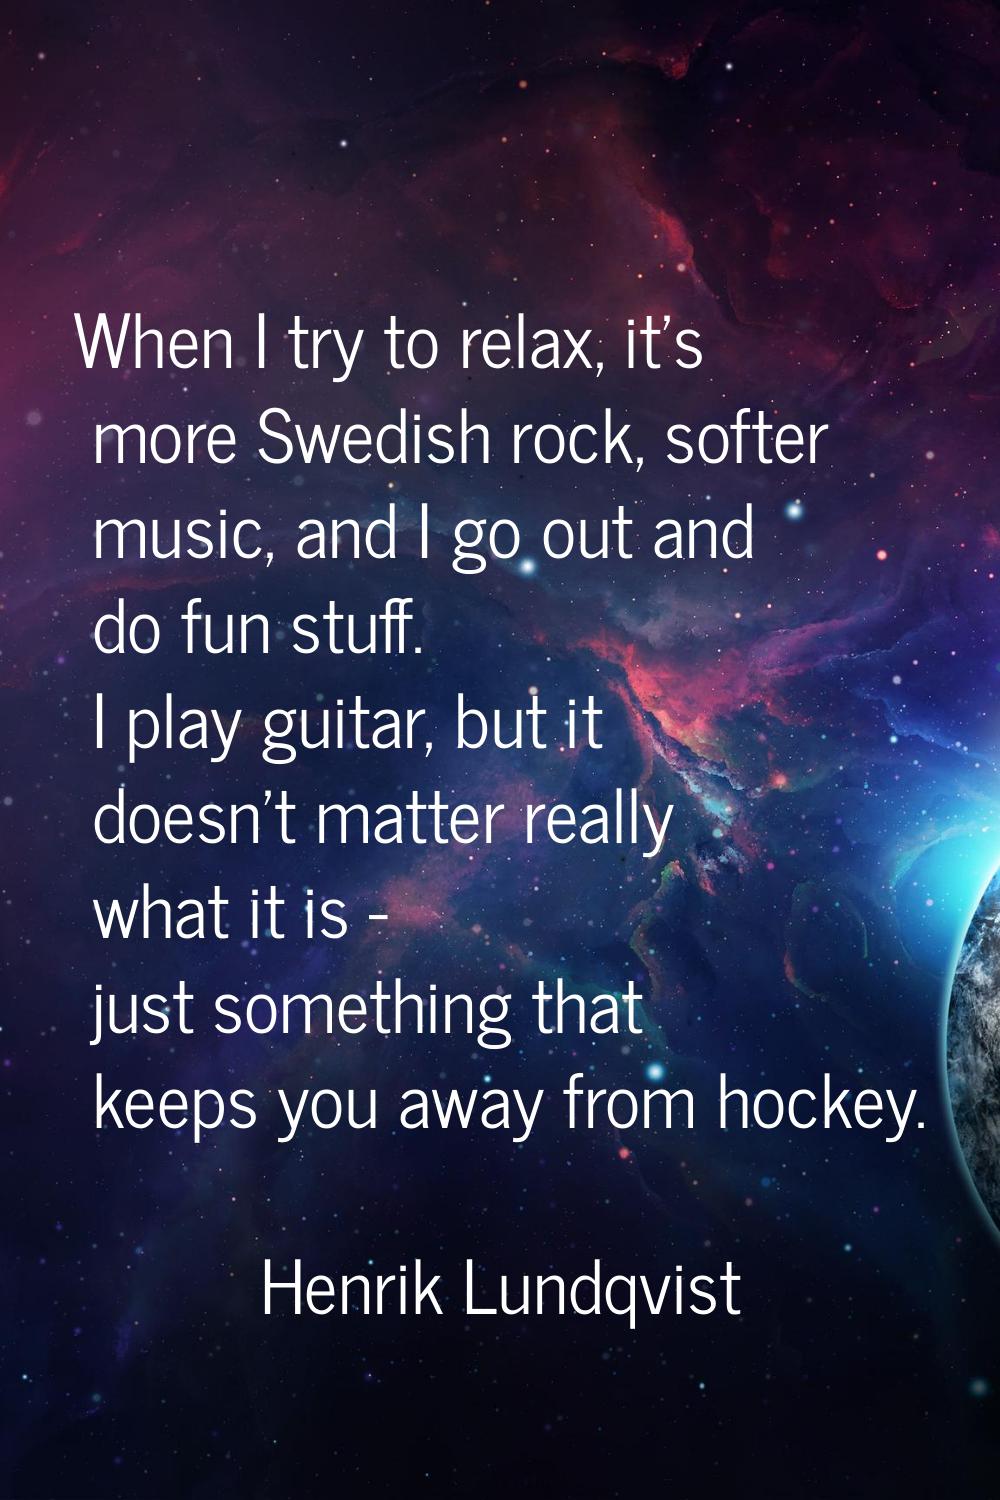 When I try to relax, it's more Swedish rock, softer music, and I go out and do fun stuff. I play gu